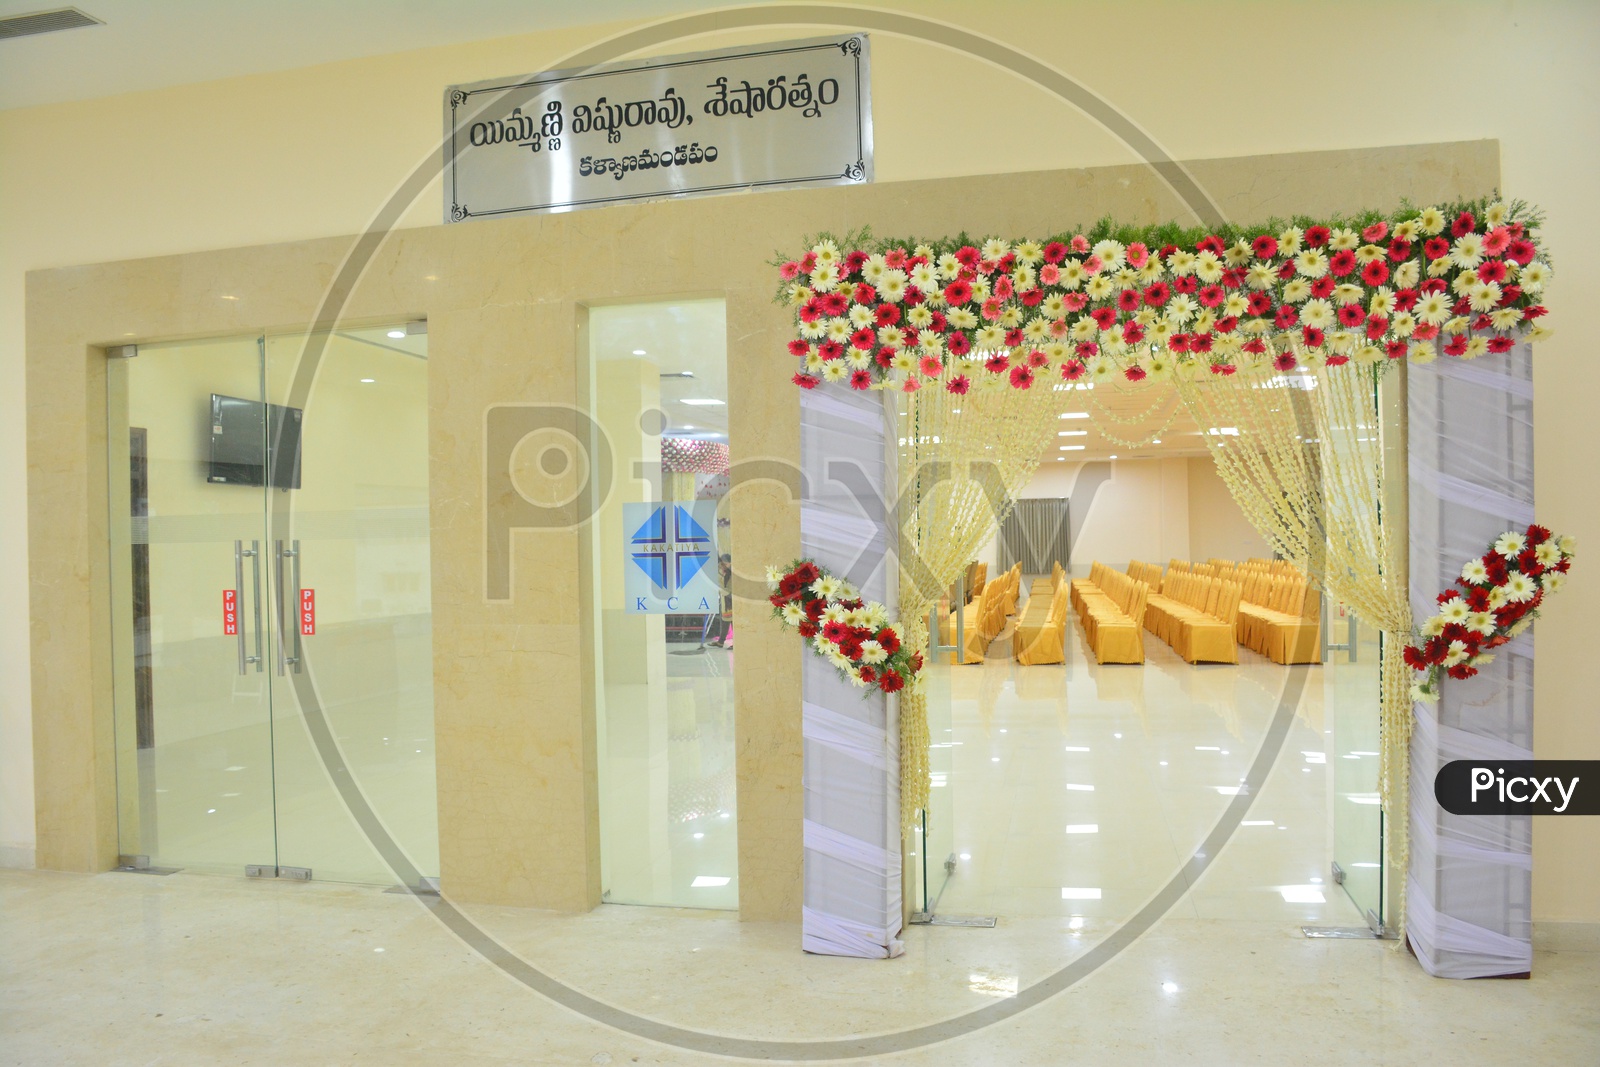 Decoration With  Fresh Flowers  in a Wedding Hall  or Convention Hall